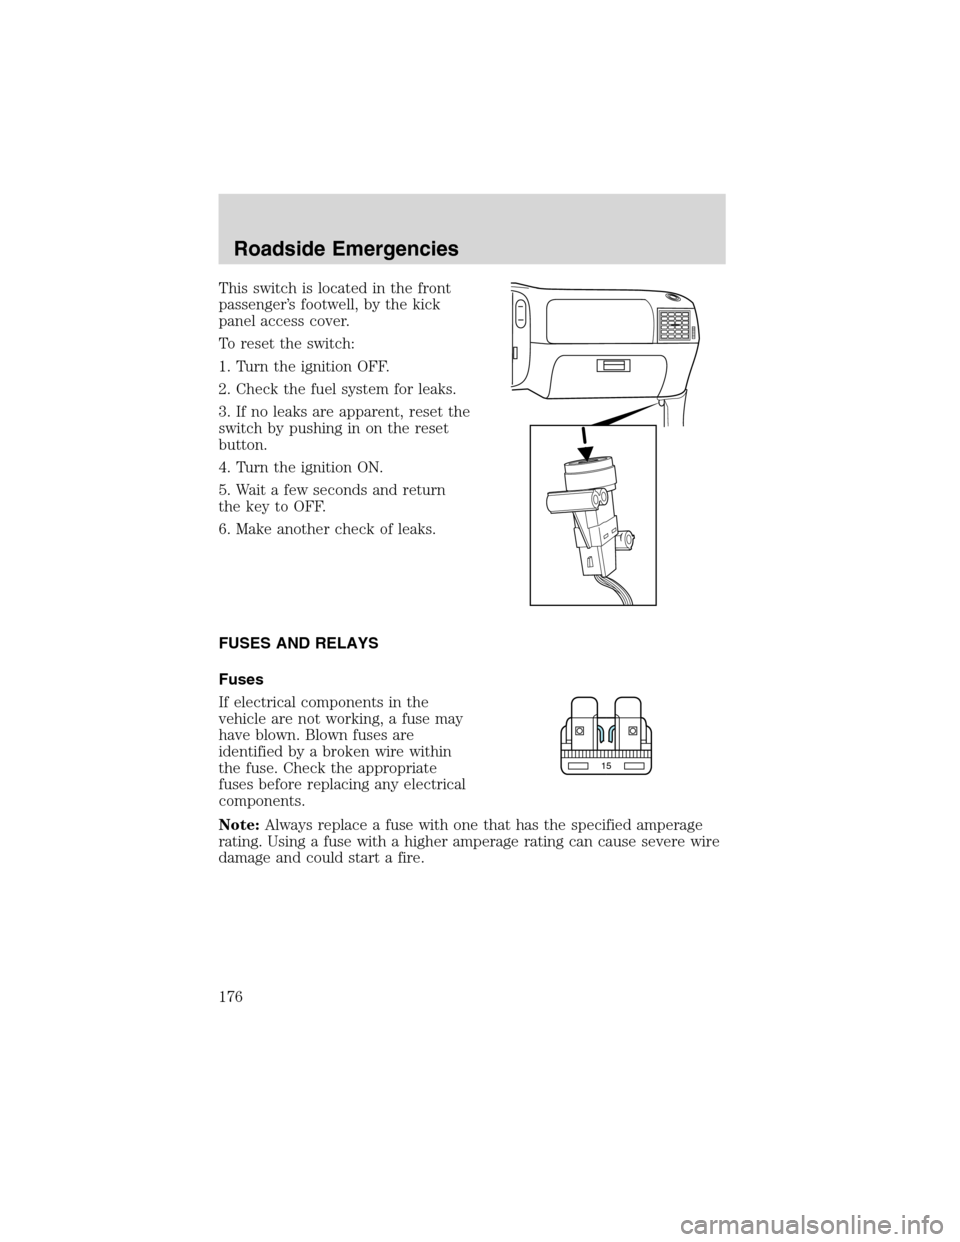 LINCOLN BLACKWOOD 2003  Owners Manual This switch is located in the front
passenger’s footwell, by the kick
panel access cover.
To reset the switch:
1. Turn the ignition OFF.
2. Check the fuel system for leaks.
3. If no leaks are appare